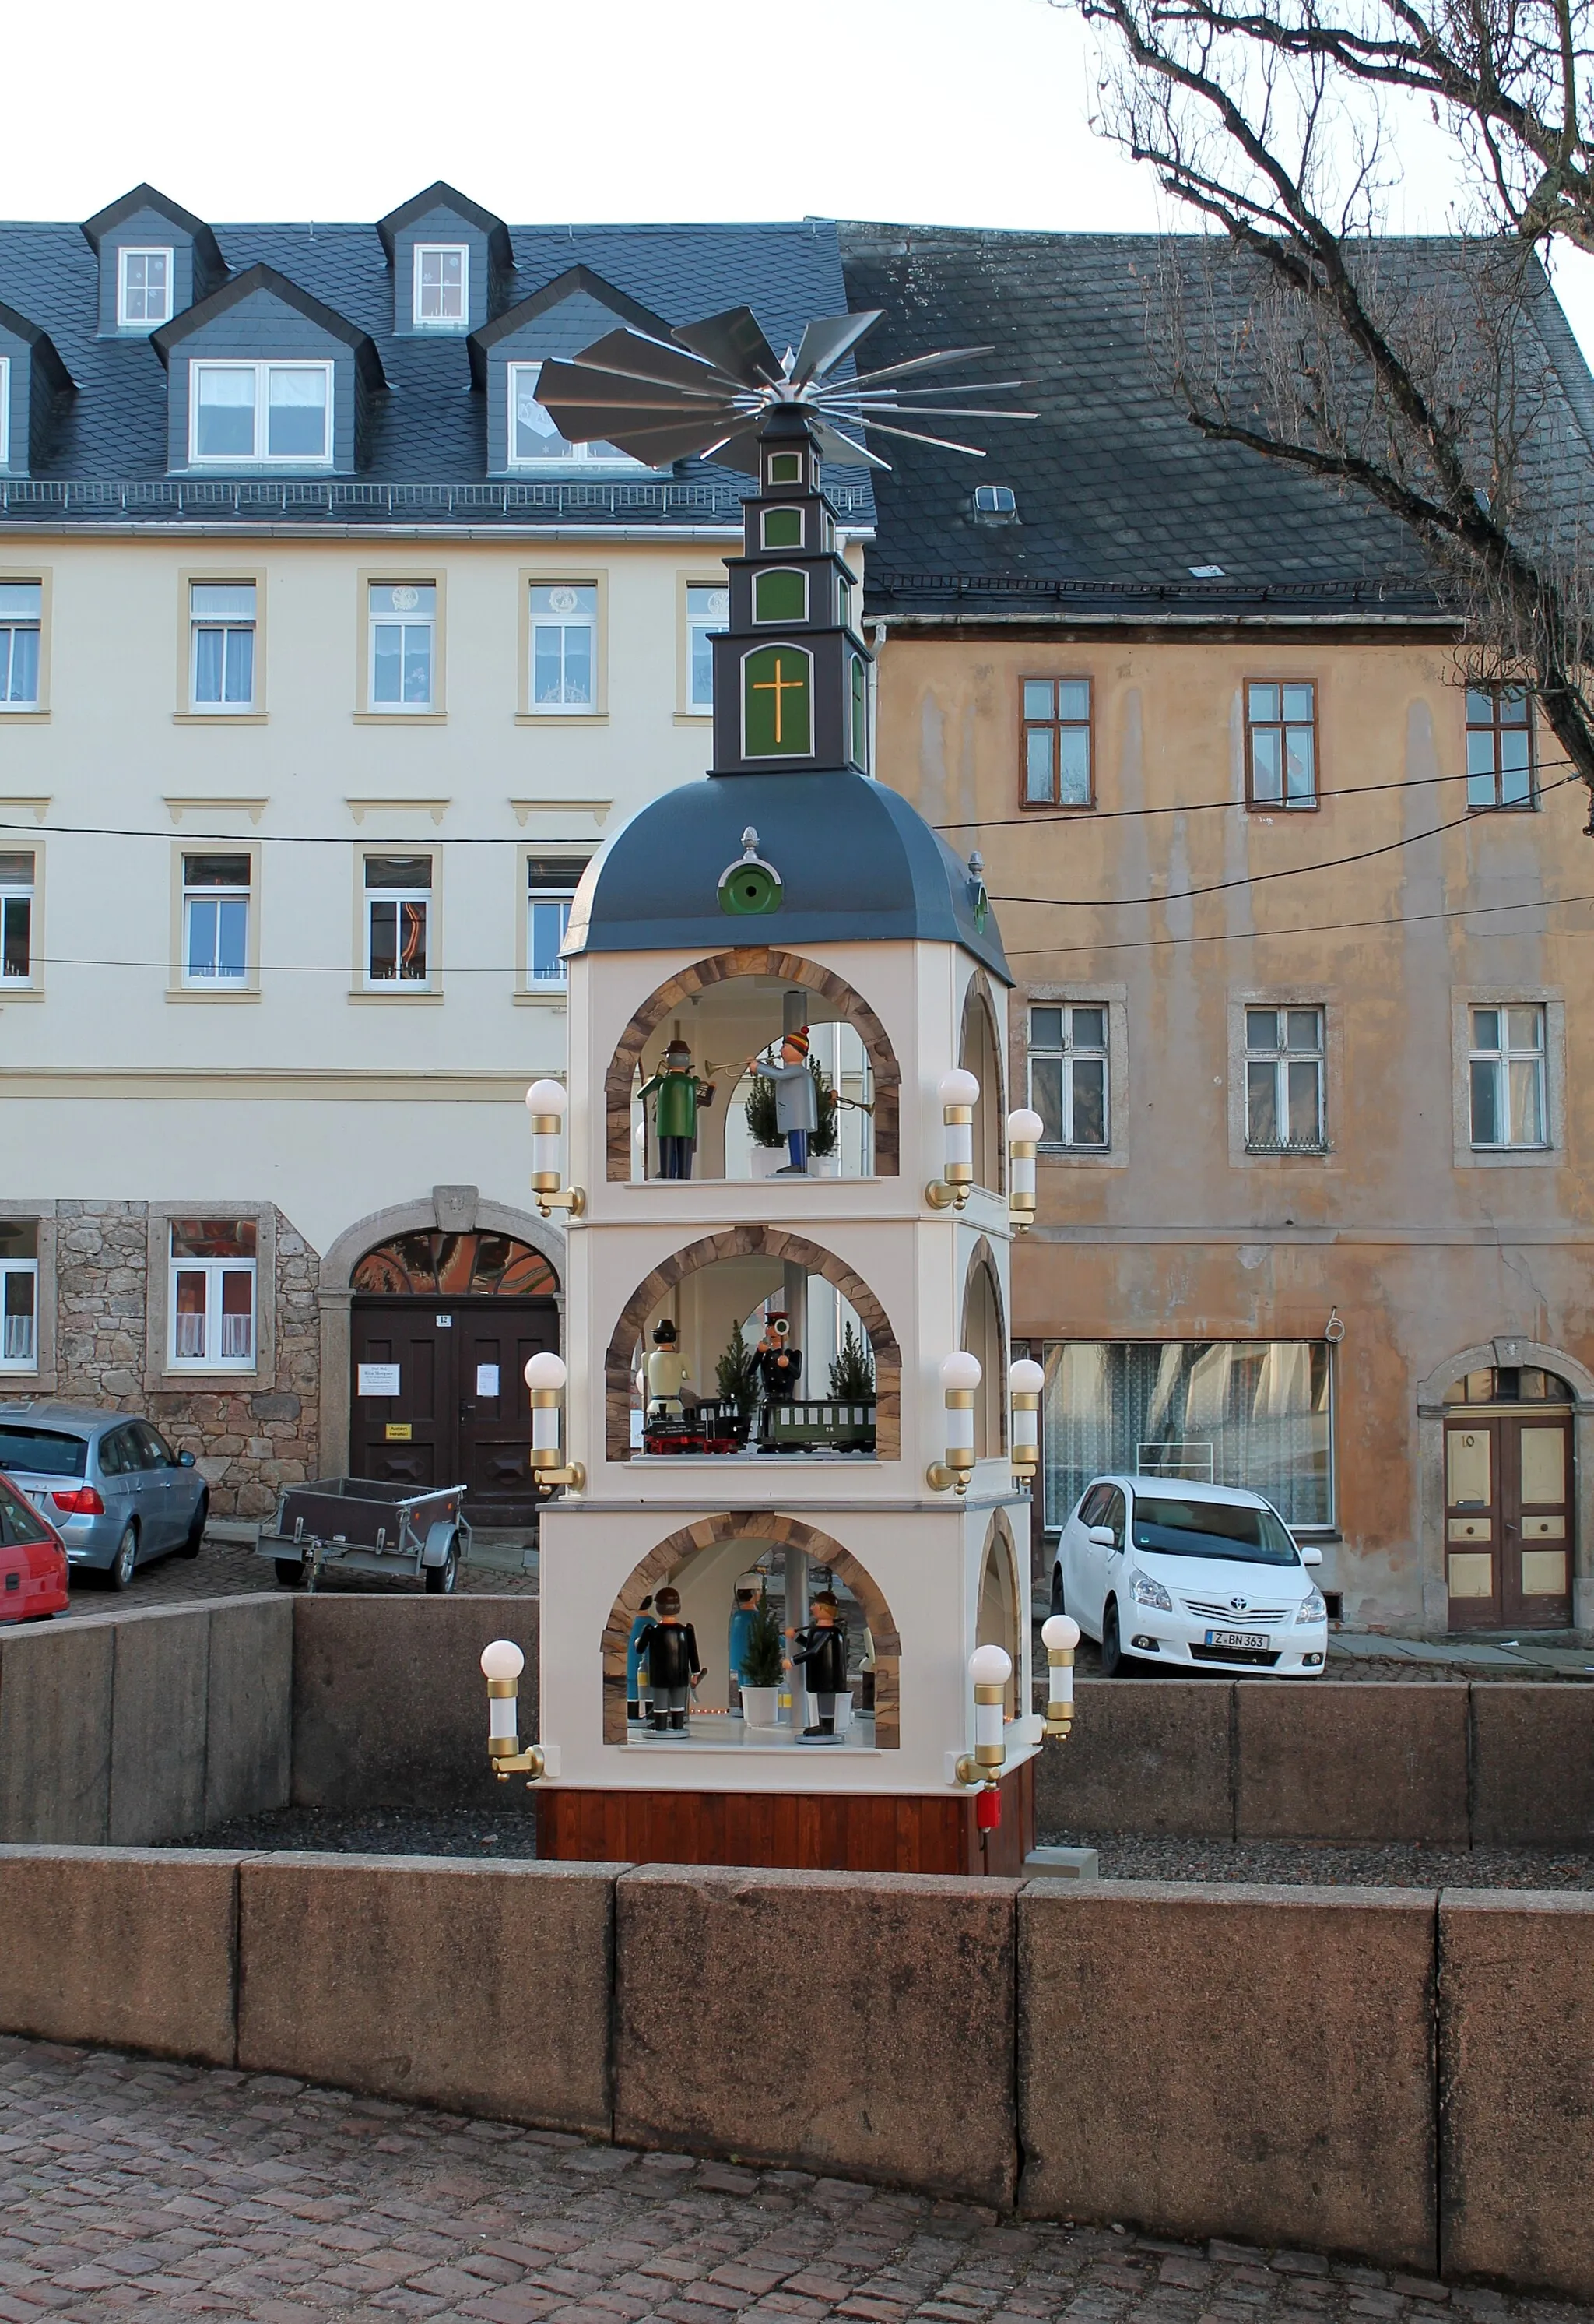 Photo showing: Outdoor christmas pyramid in Kirchberg, Saxony, Germany.